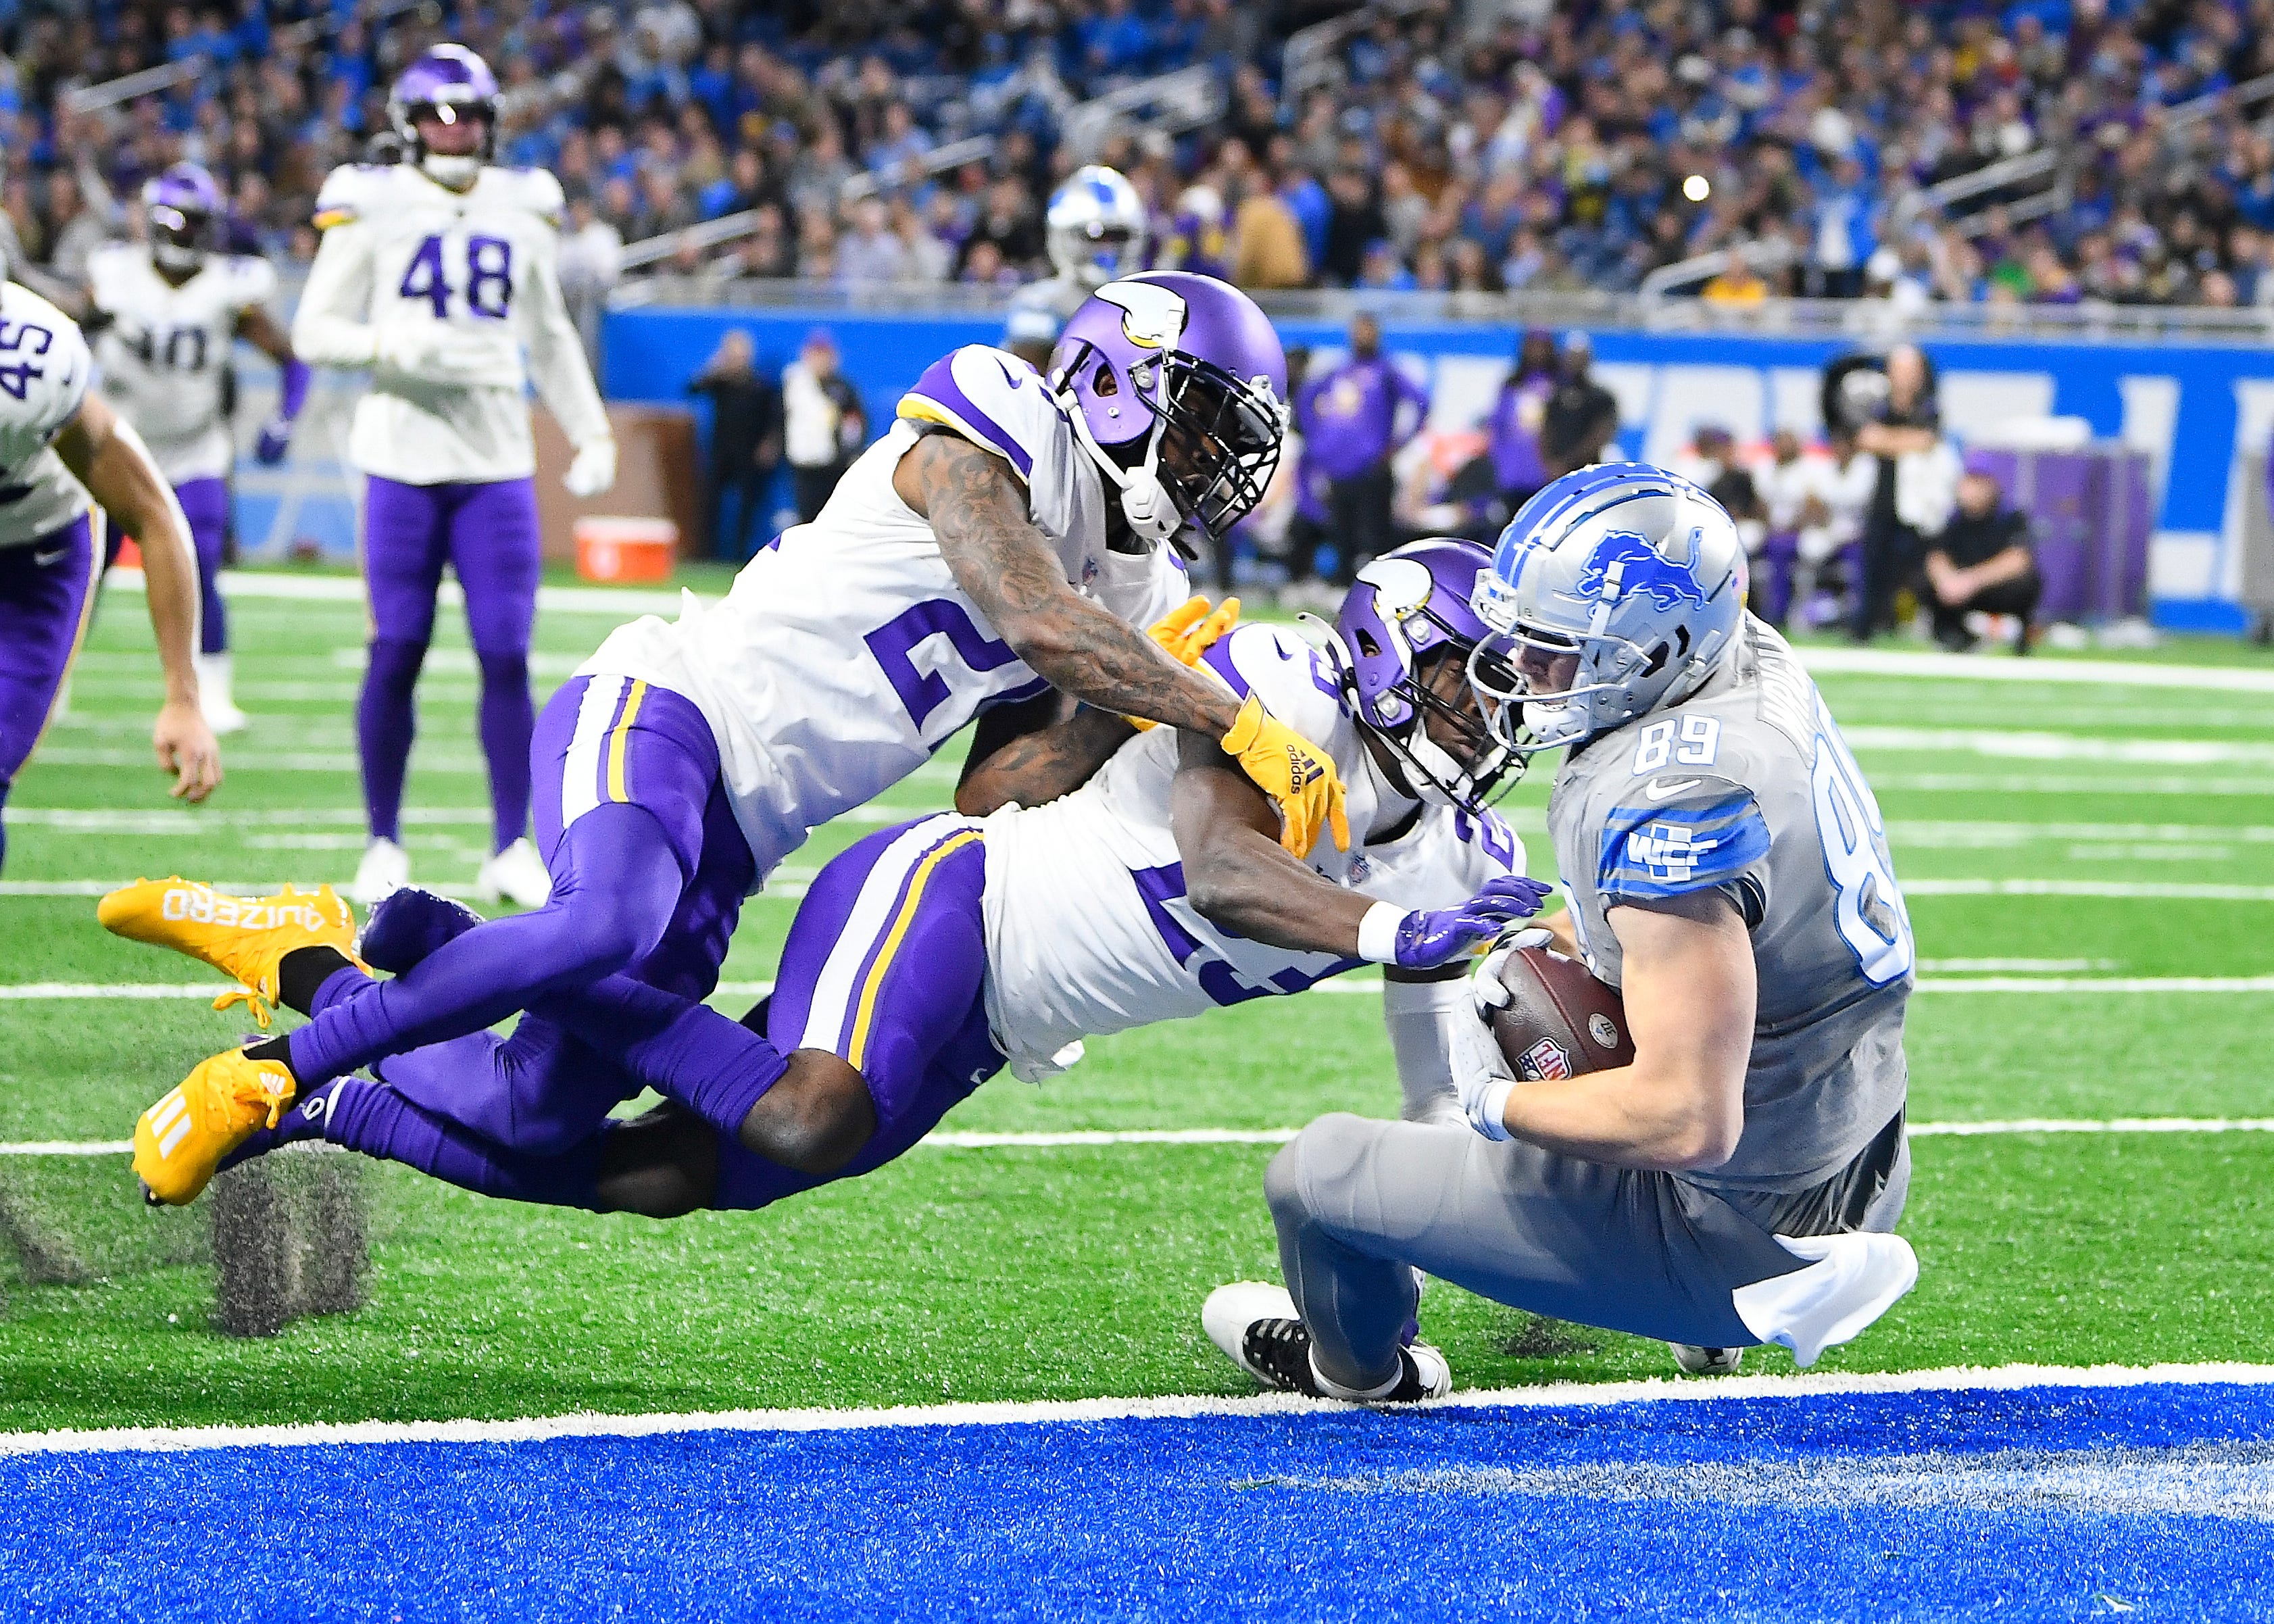 Detroit Lions' Brock Wright goes backwards into the end zone for a touchdown with Minnesota Vikings' Bashaud Breeland and Xavier Woods defending in the second quarter at Ford Field in Detroit, Michigan on December 5, 2021.